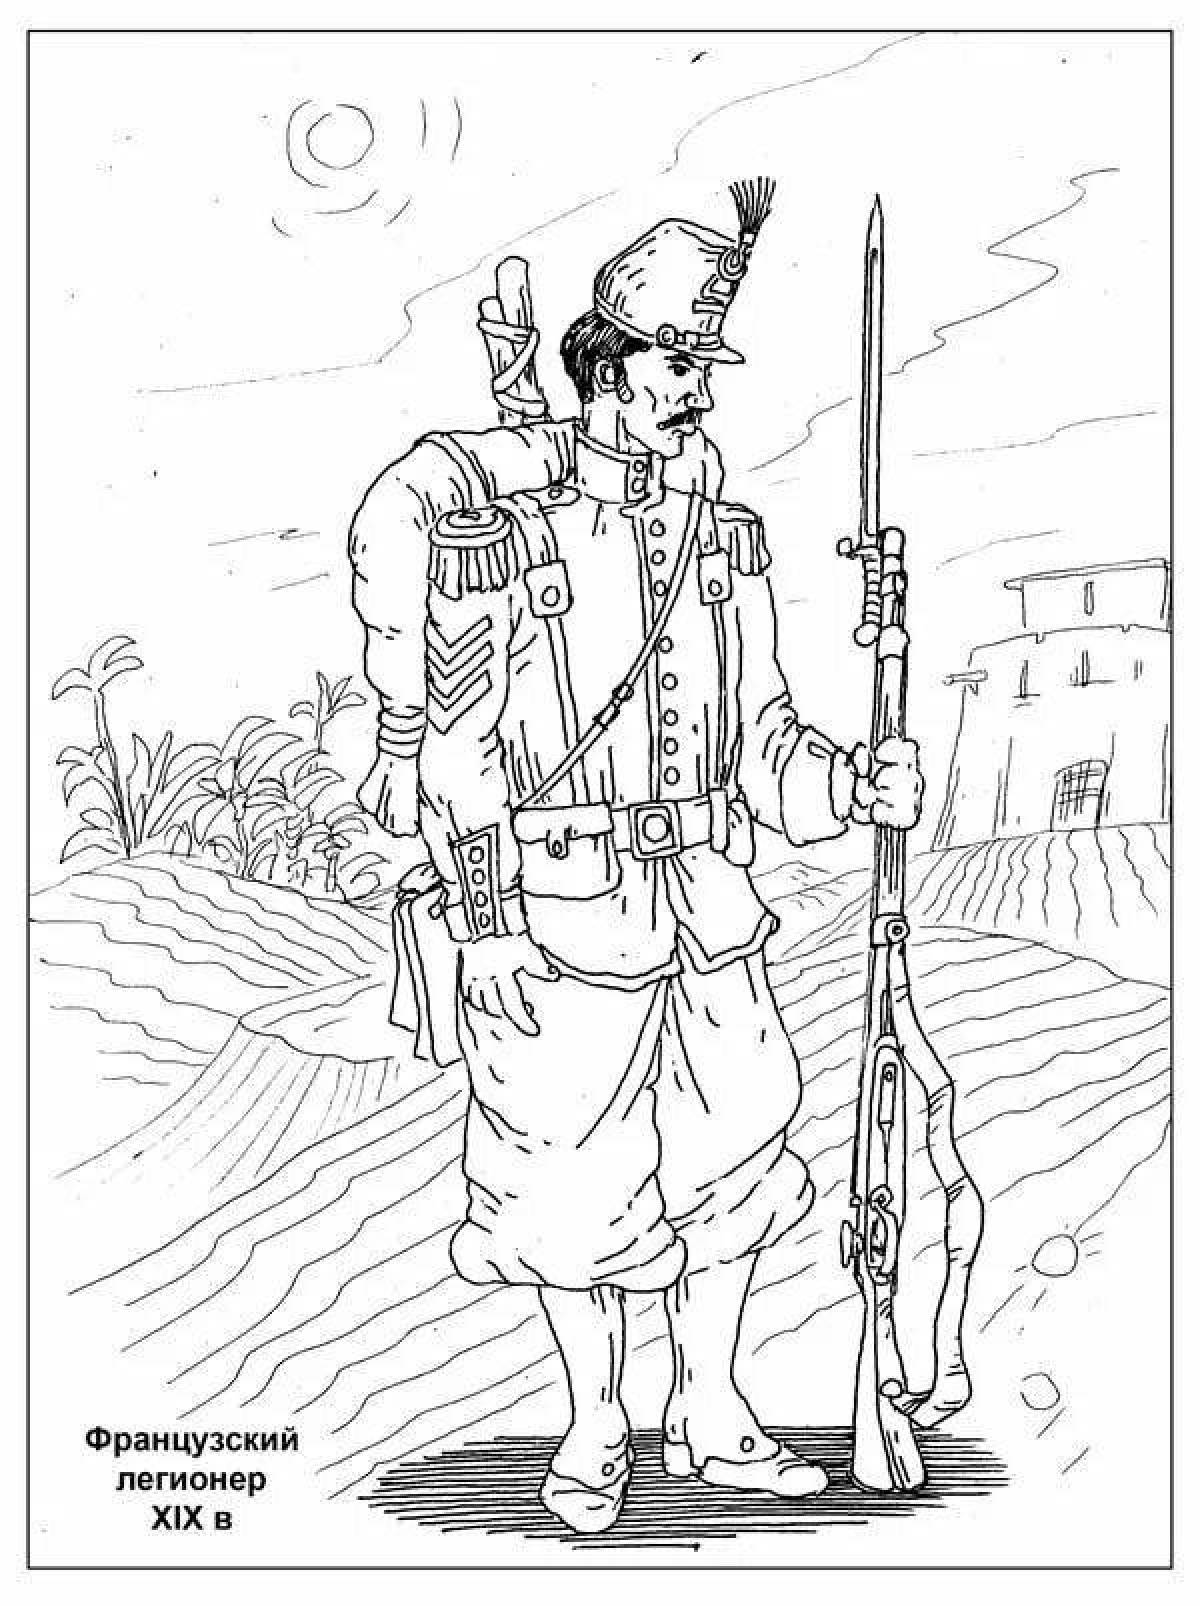 Amazingly detailed Russian soldier coloring page